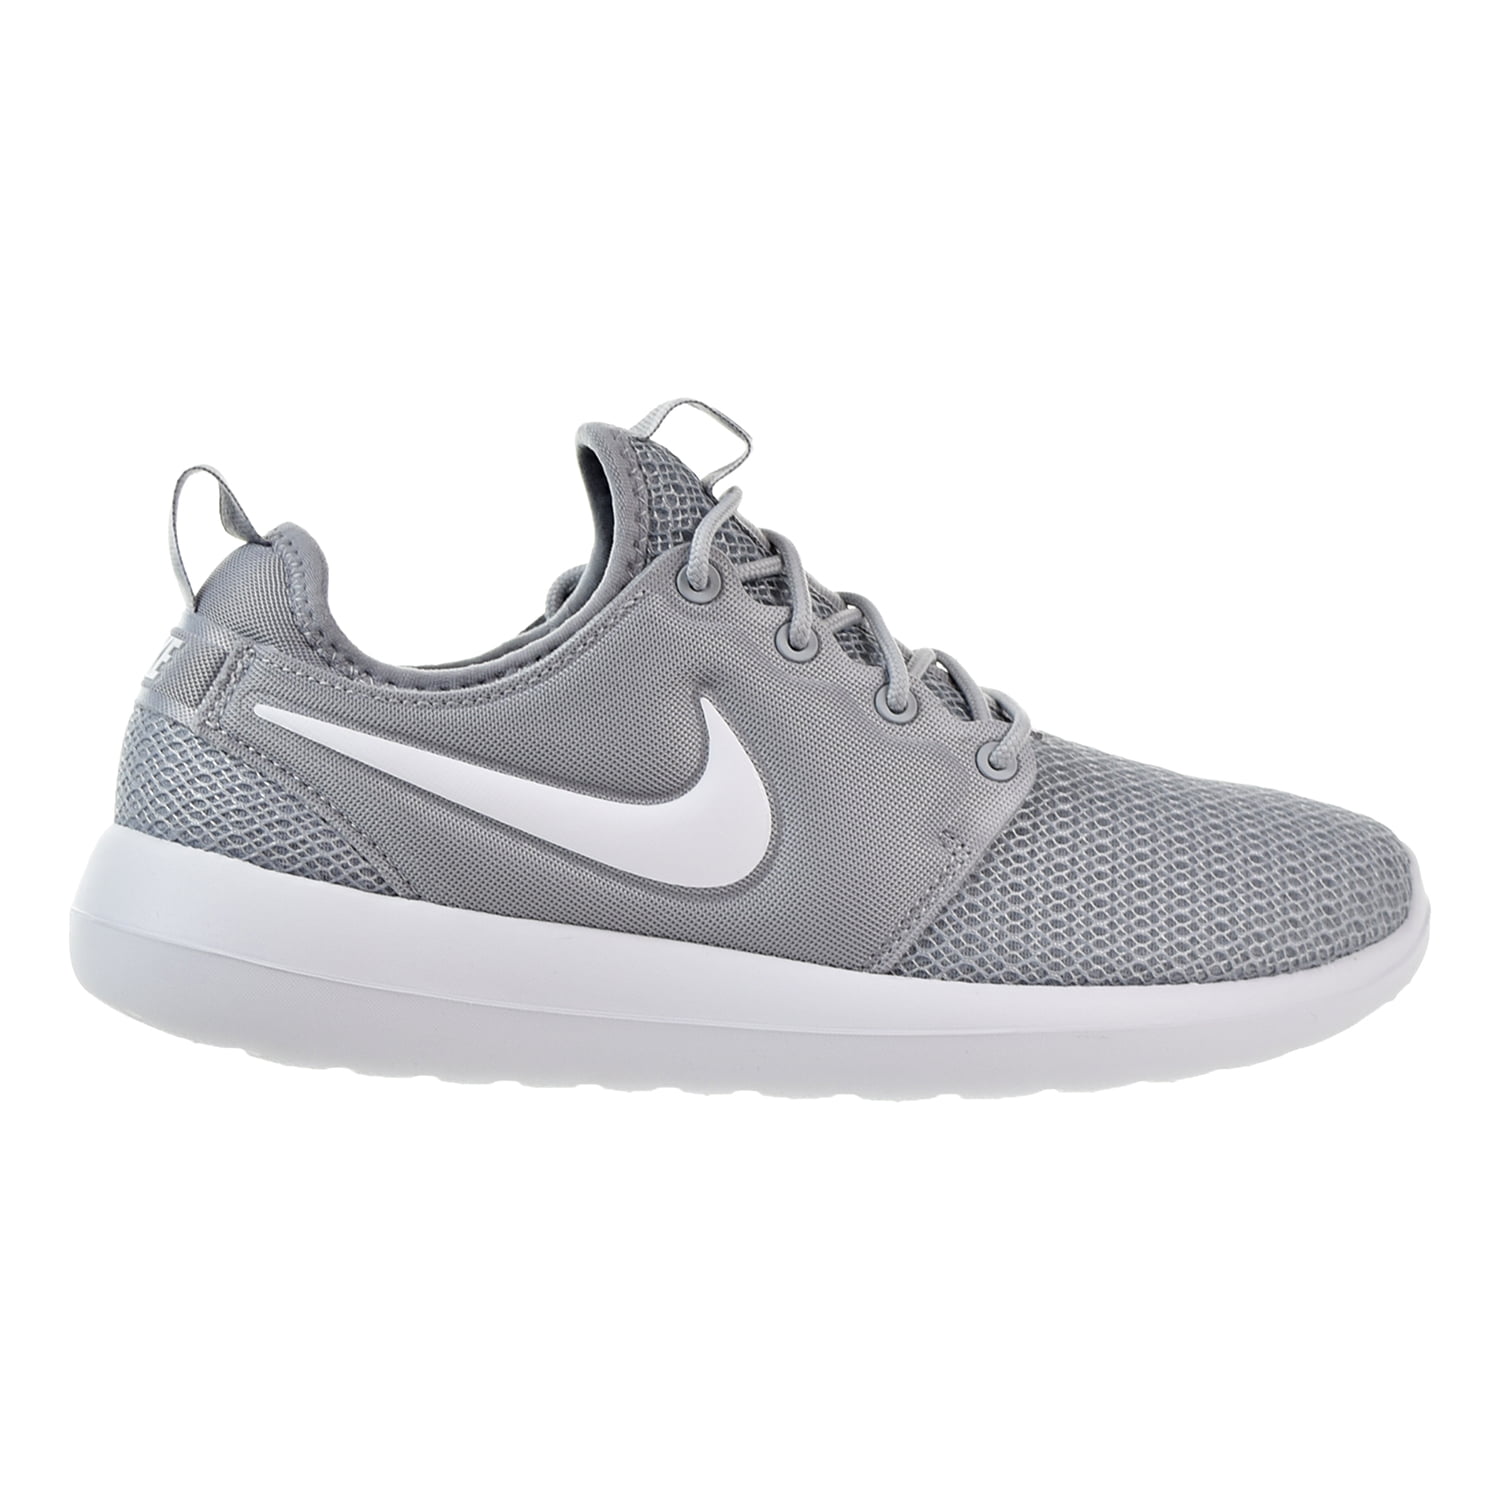 Pogo stick sprong Tot stand brengen Trots Nike Roshe Two Women's Shoes Wolf Grey/White/Wolf Grey 844931-009 (6.5 B(M)  US) - Walmart.com